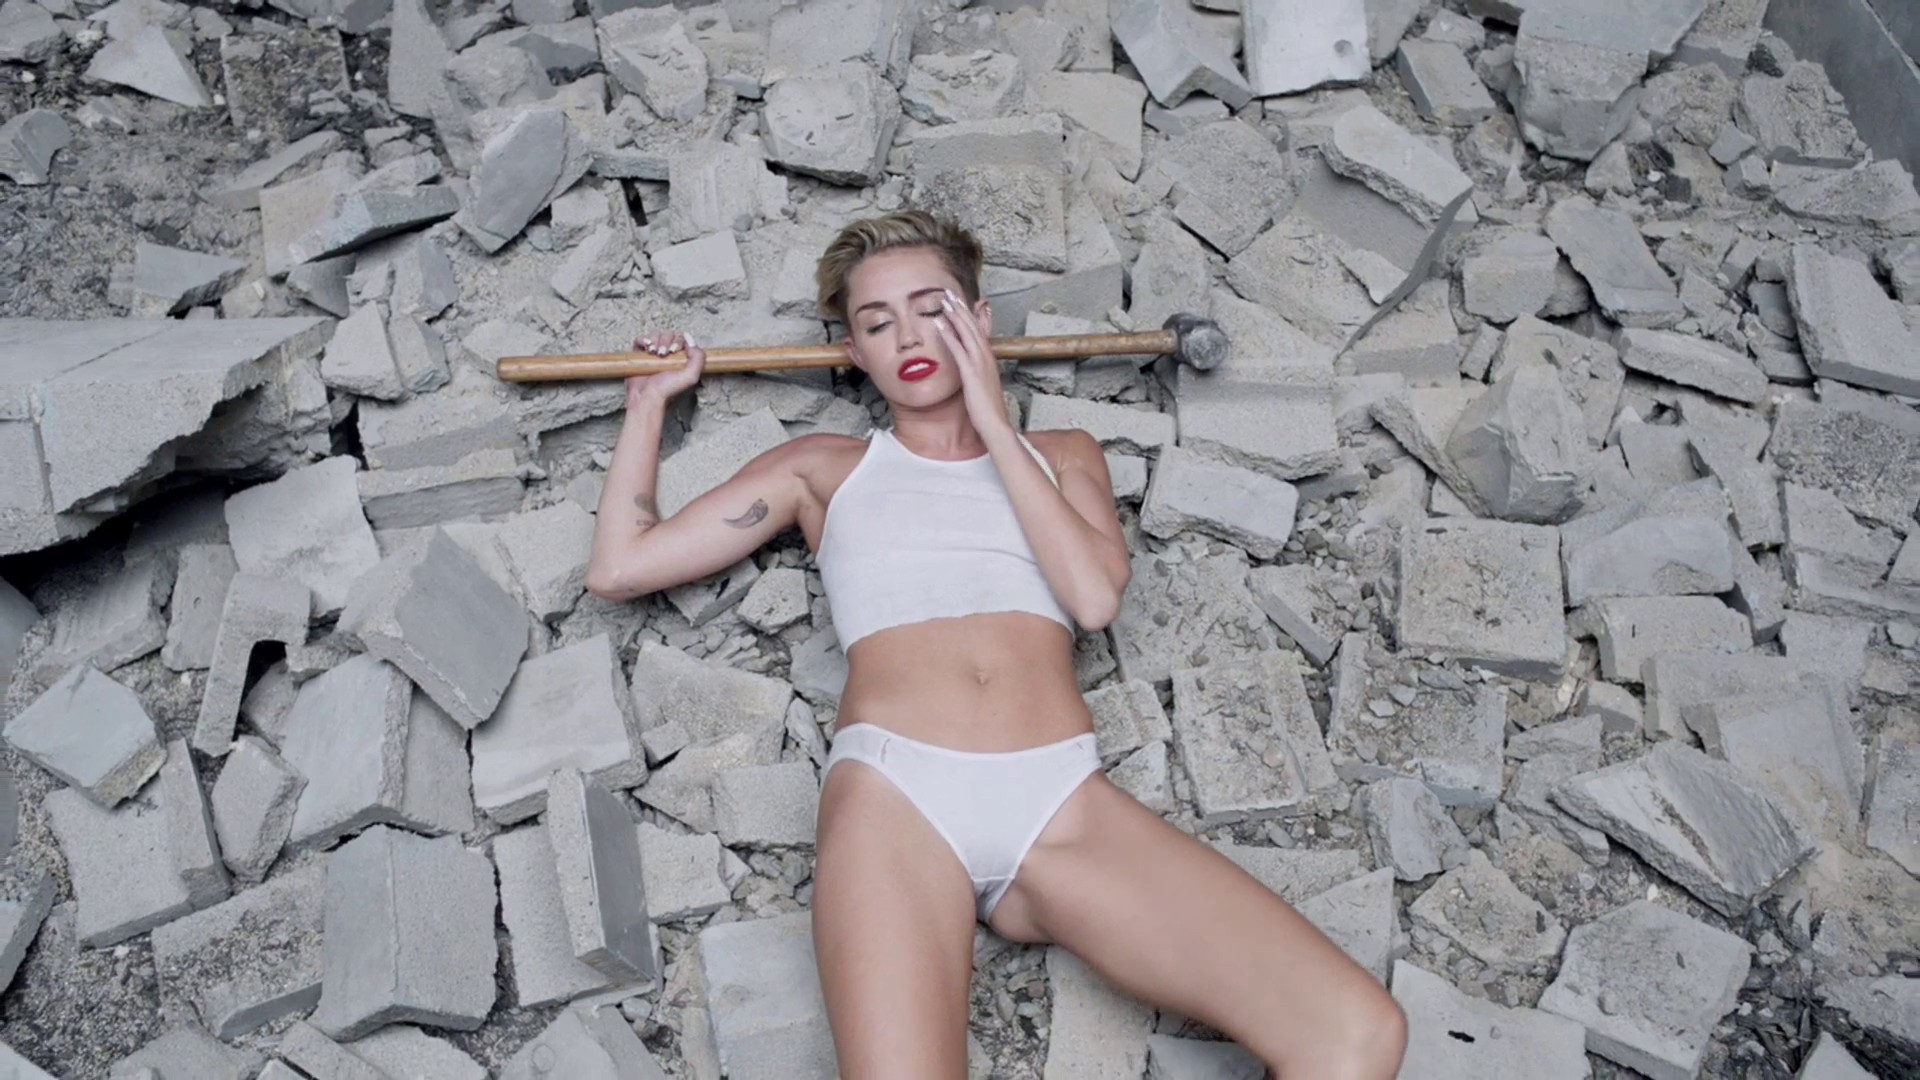 Miley Cyrus - Wrecking Ball explicit uncensored video 1080p2640.jpg